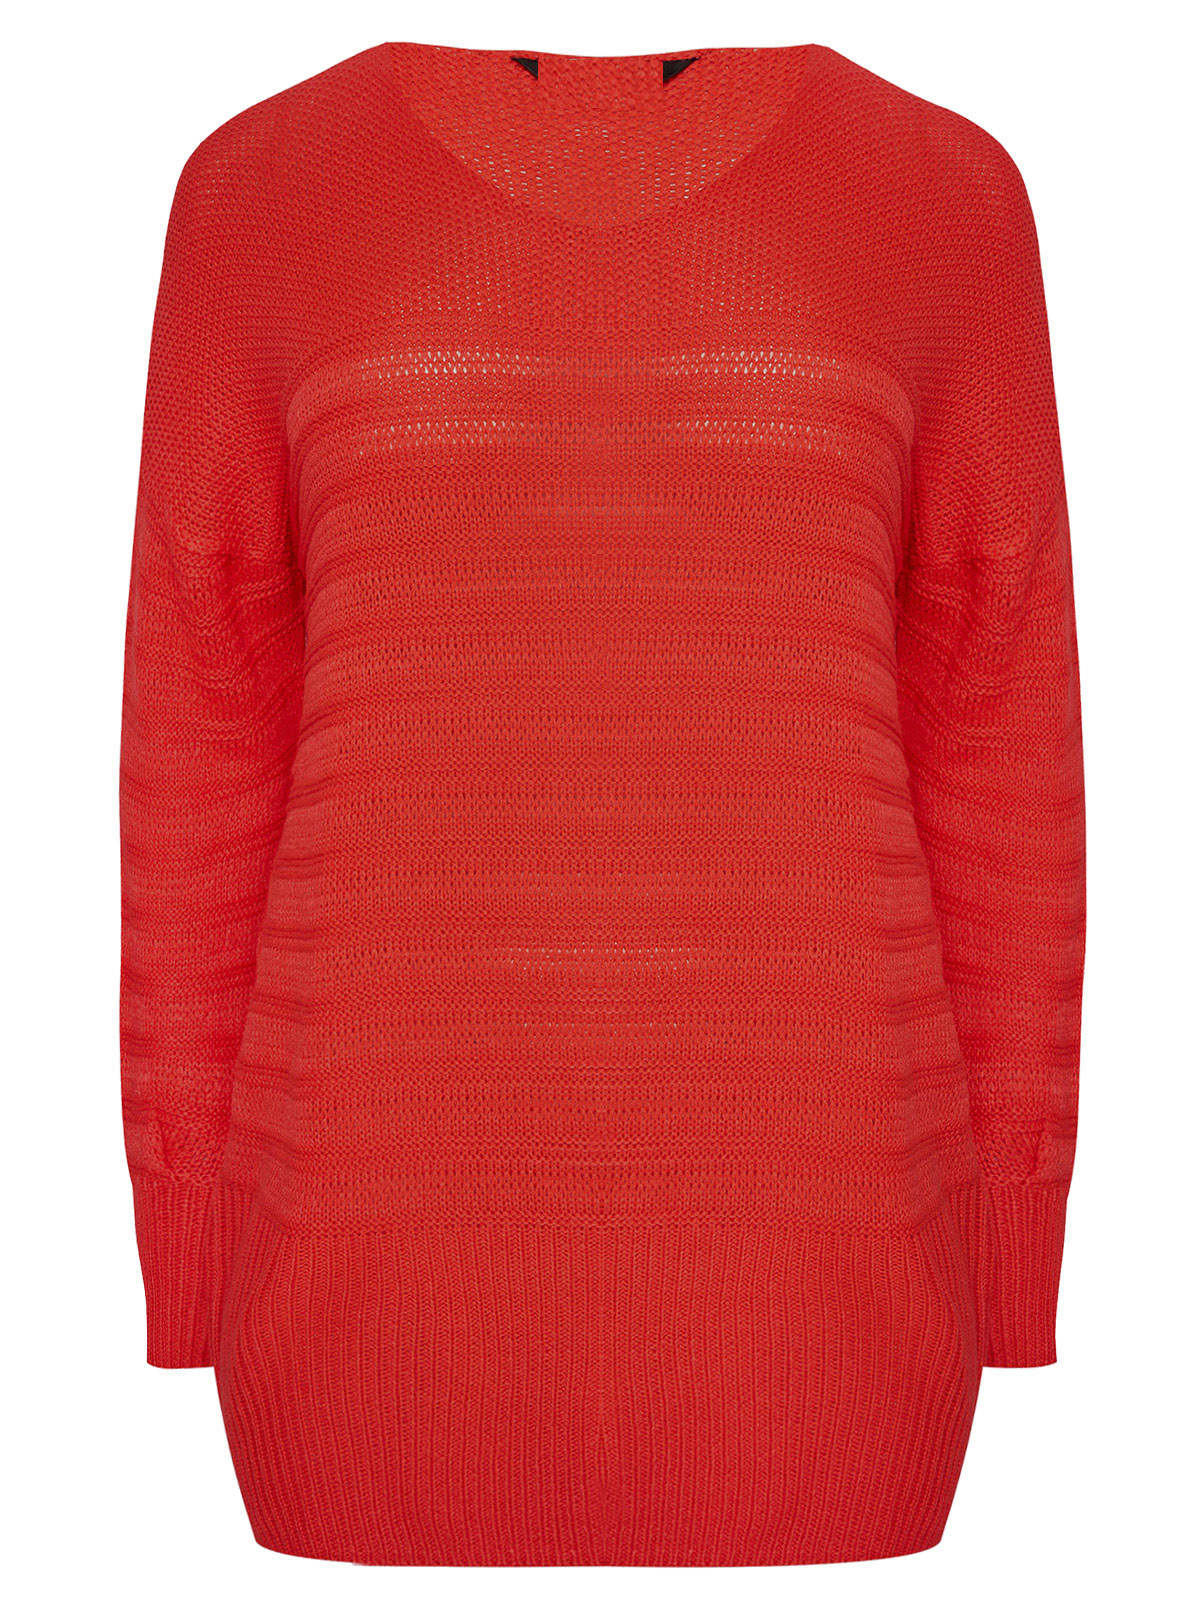 CURVE - - RED Ripple Stitch Knitted Jumper - Plus Size 16 to 34/36